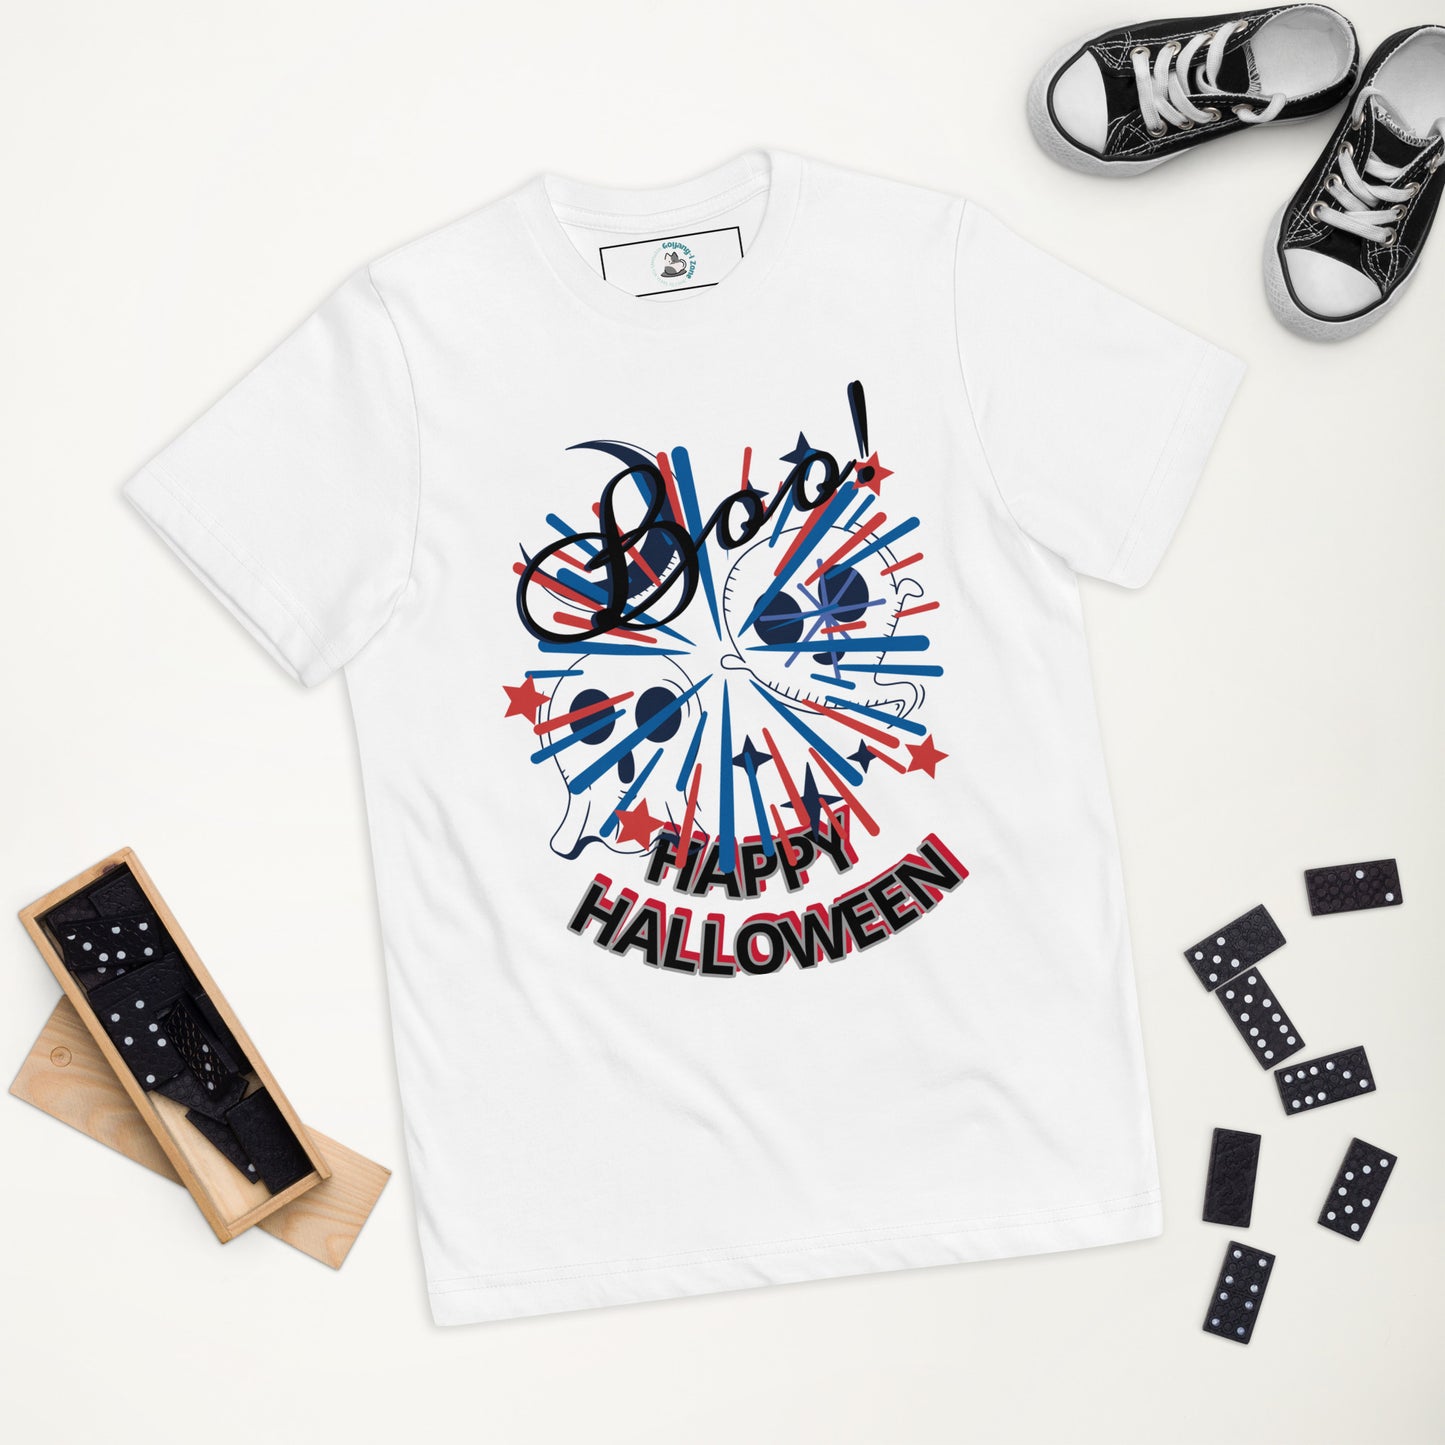 Boo Youth jersey t-shirt